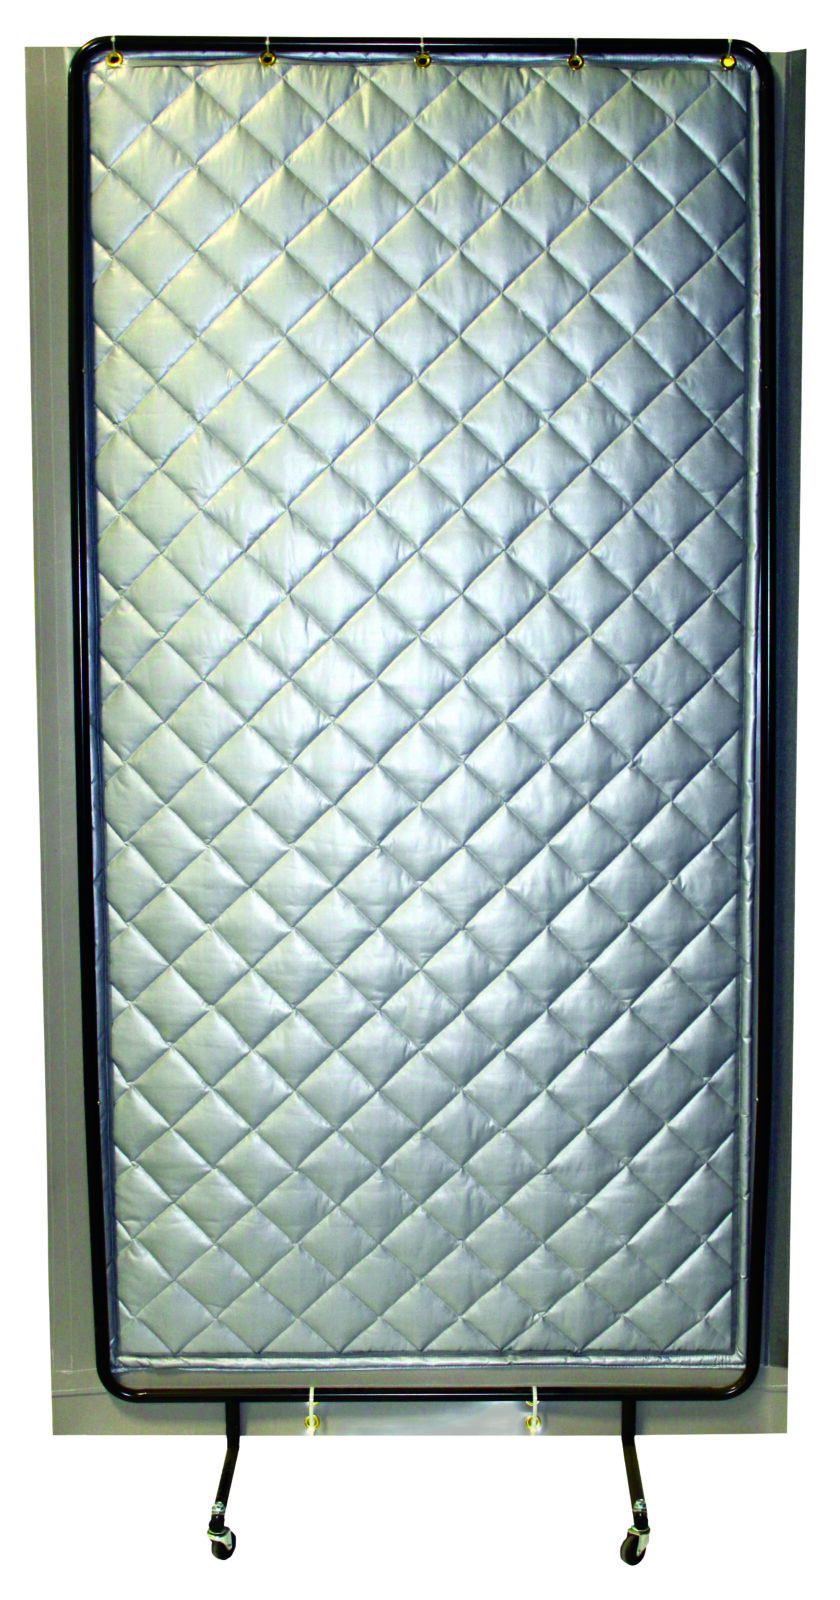 Portable Soundproofing with Sound Barrier Curtain